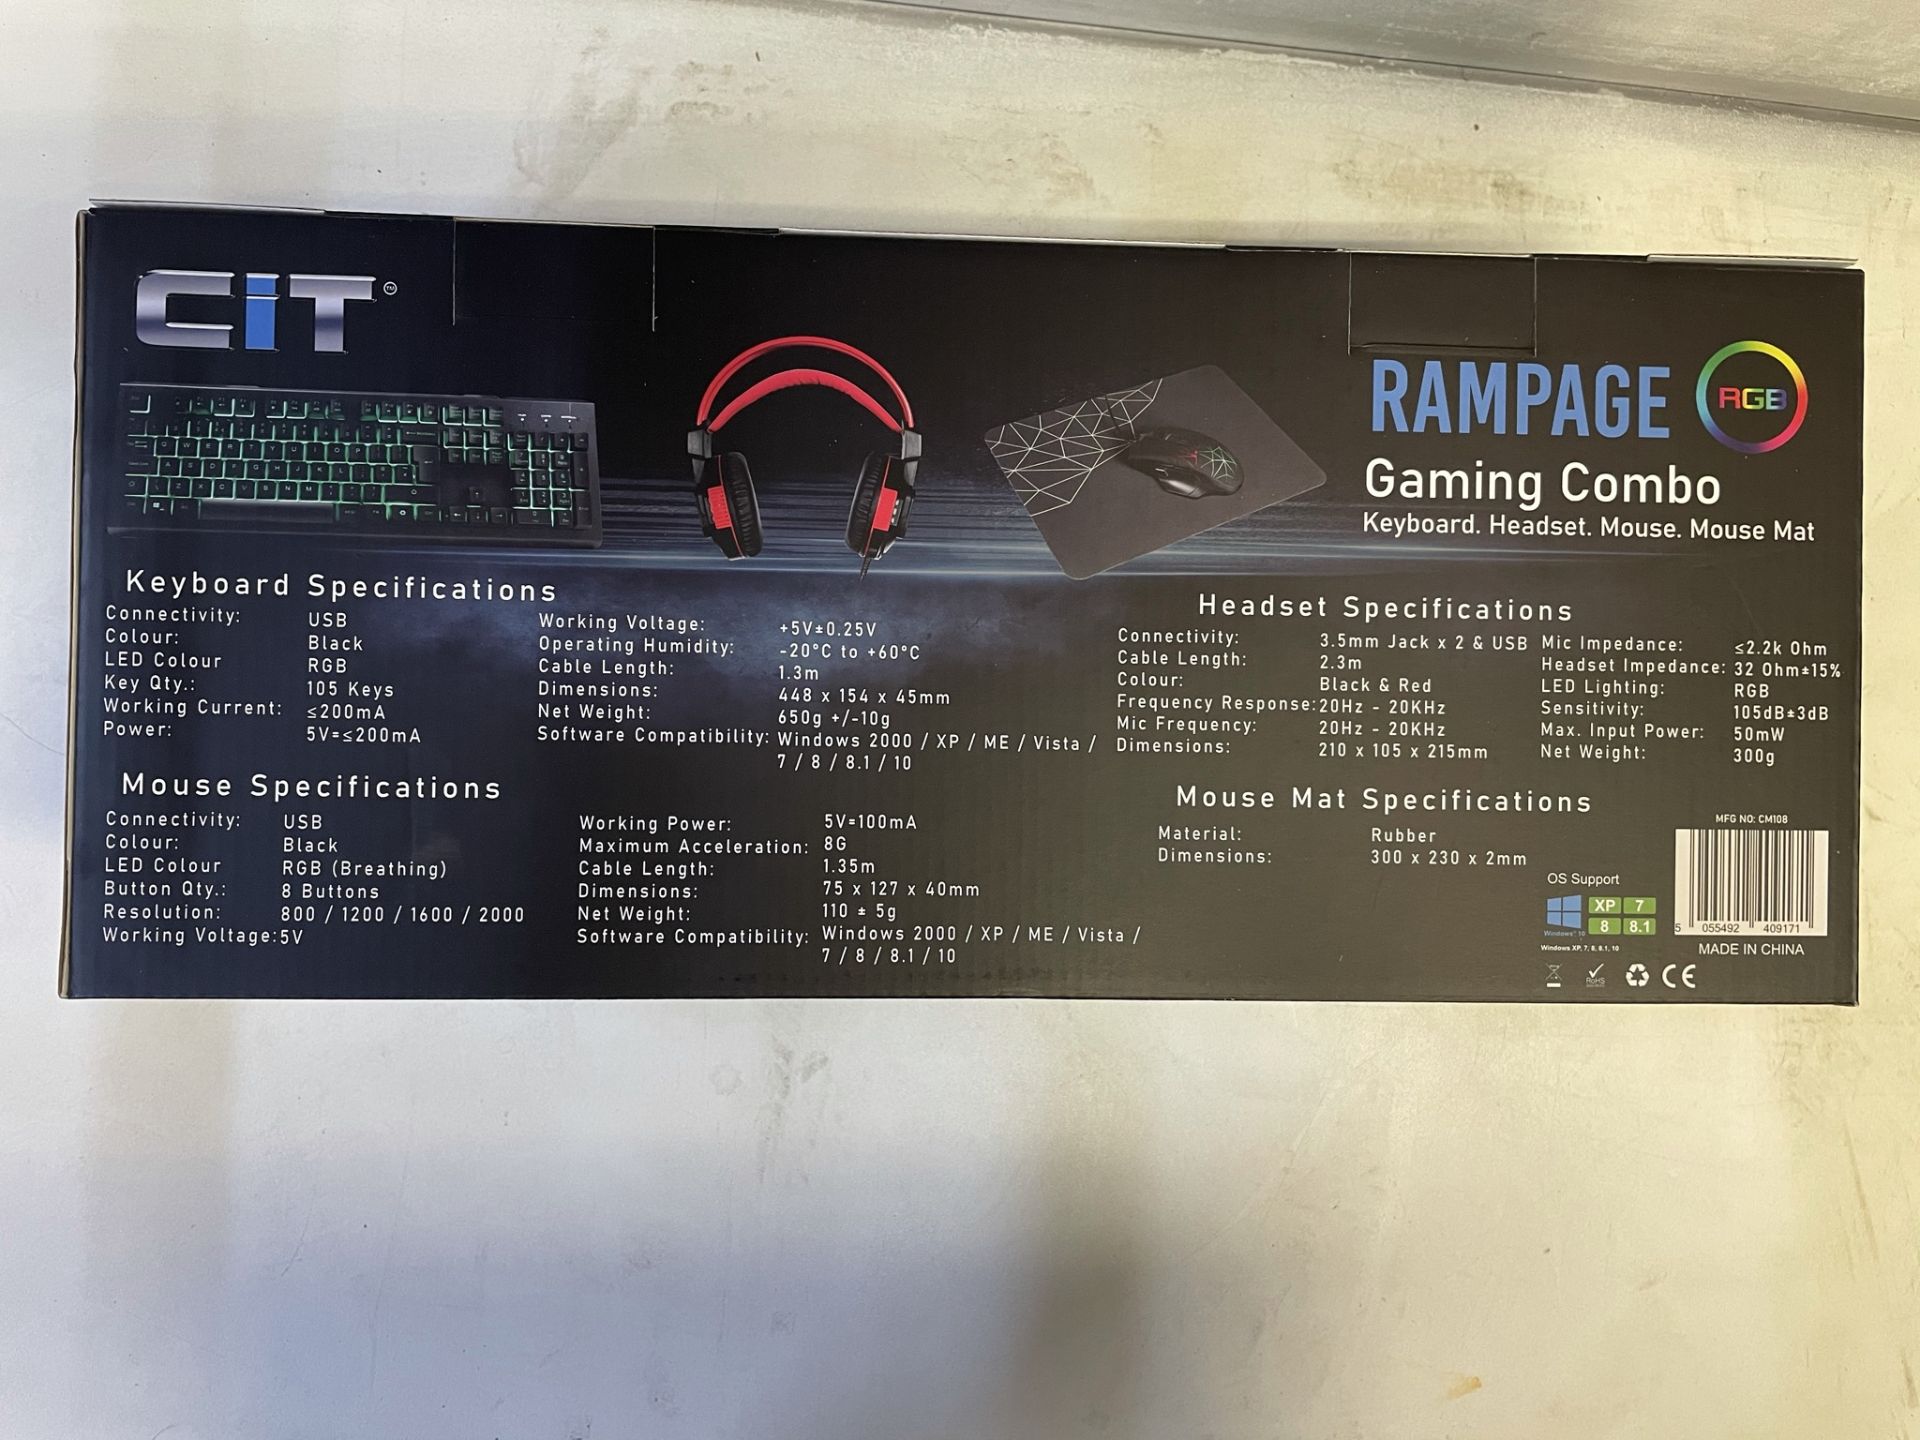 CiT Rampage Gaming Combo Set includes: Keyboard, Headset, Mouse & Mouse Mat - Image 3 of 3